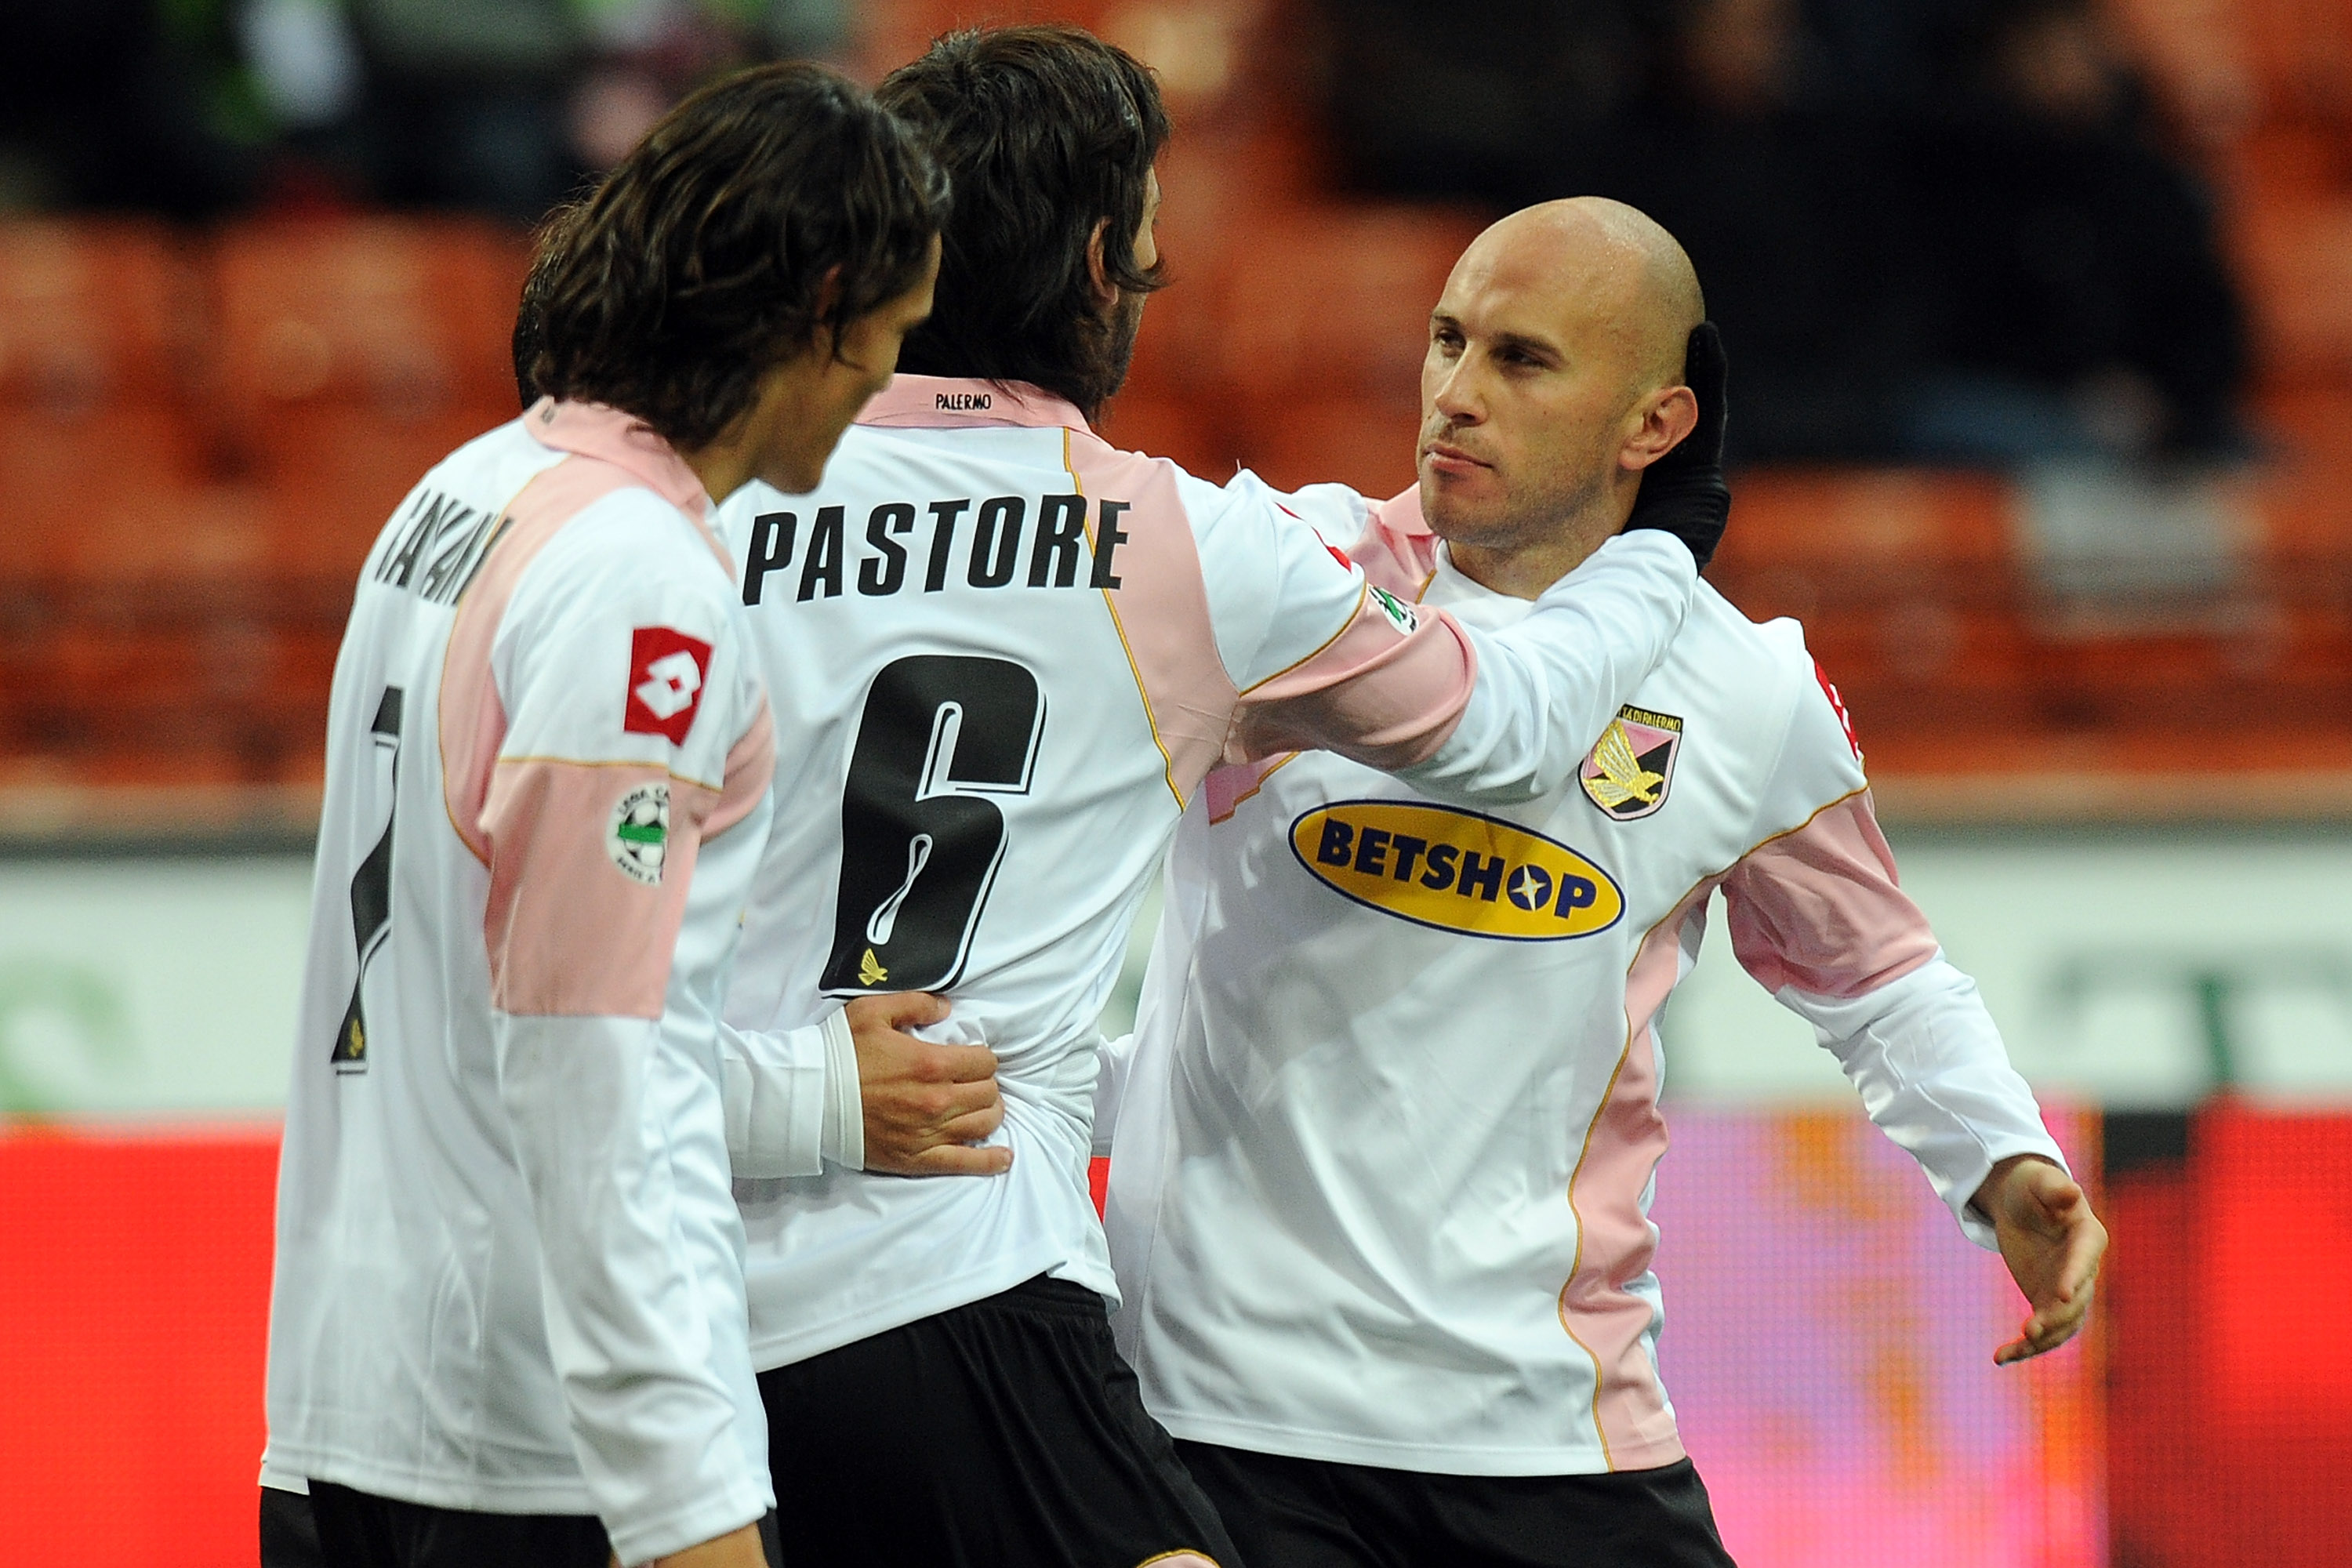 City Football Group wants to buy Palermo